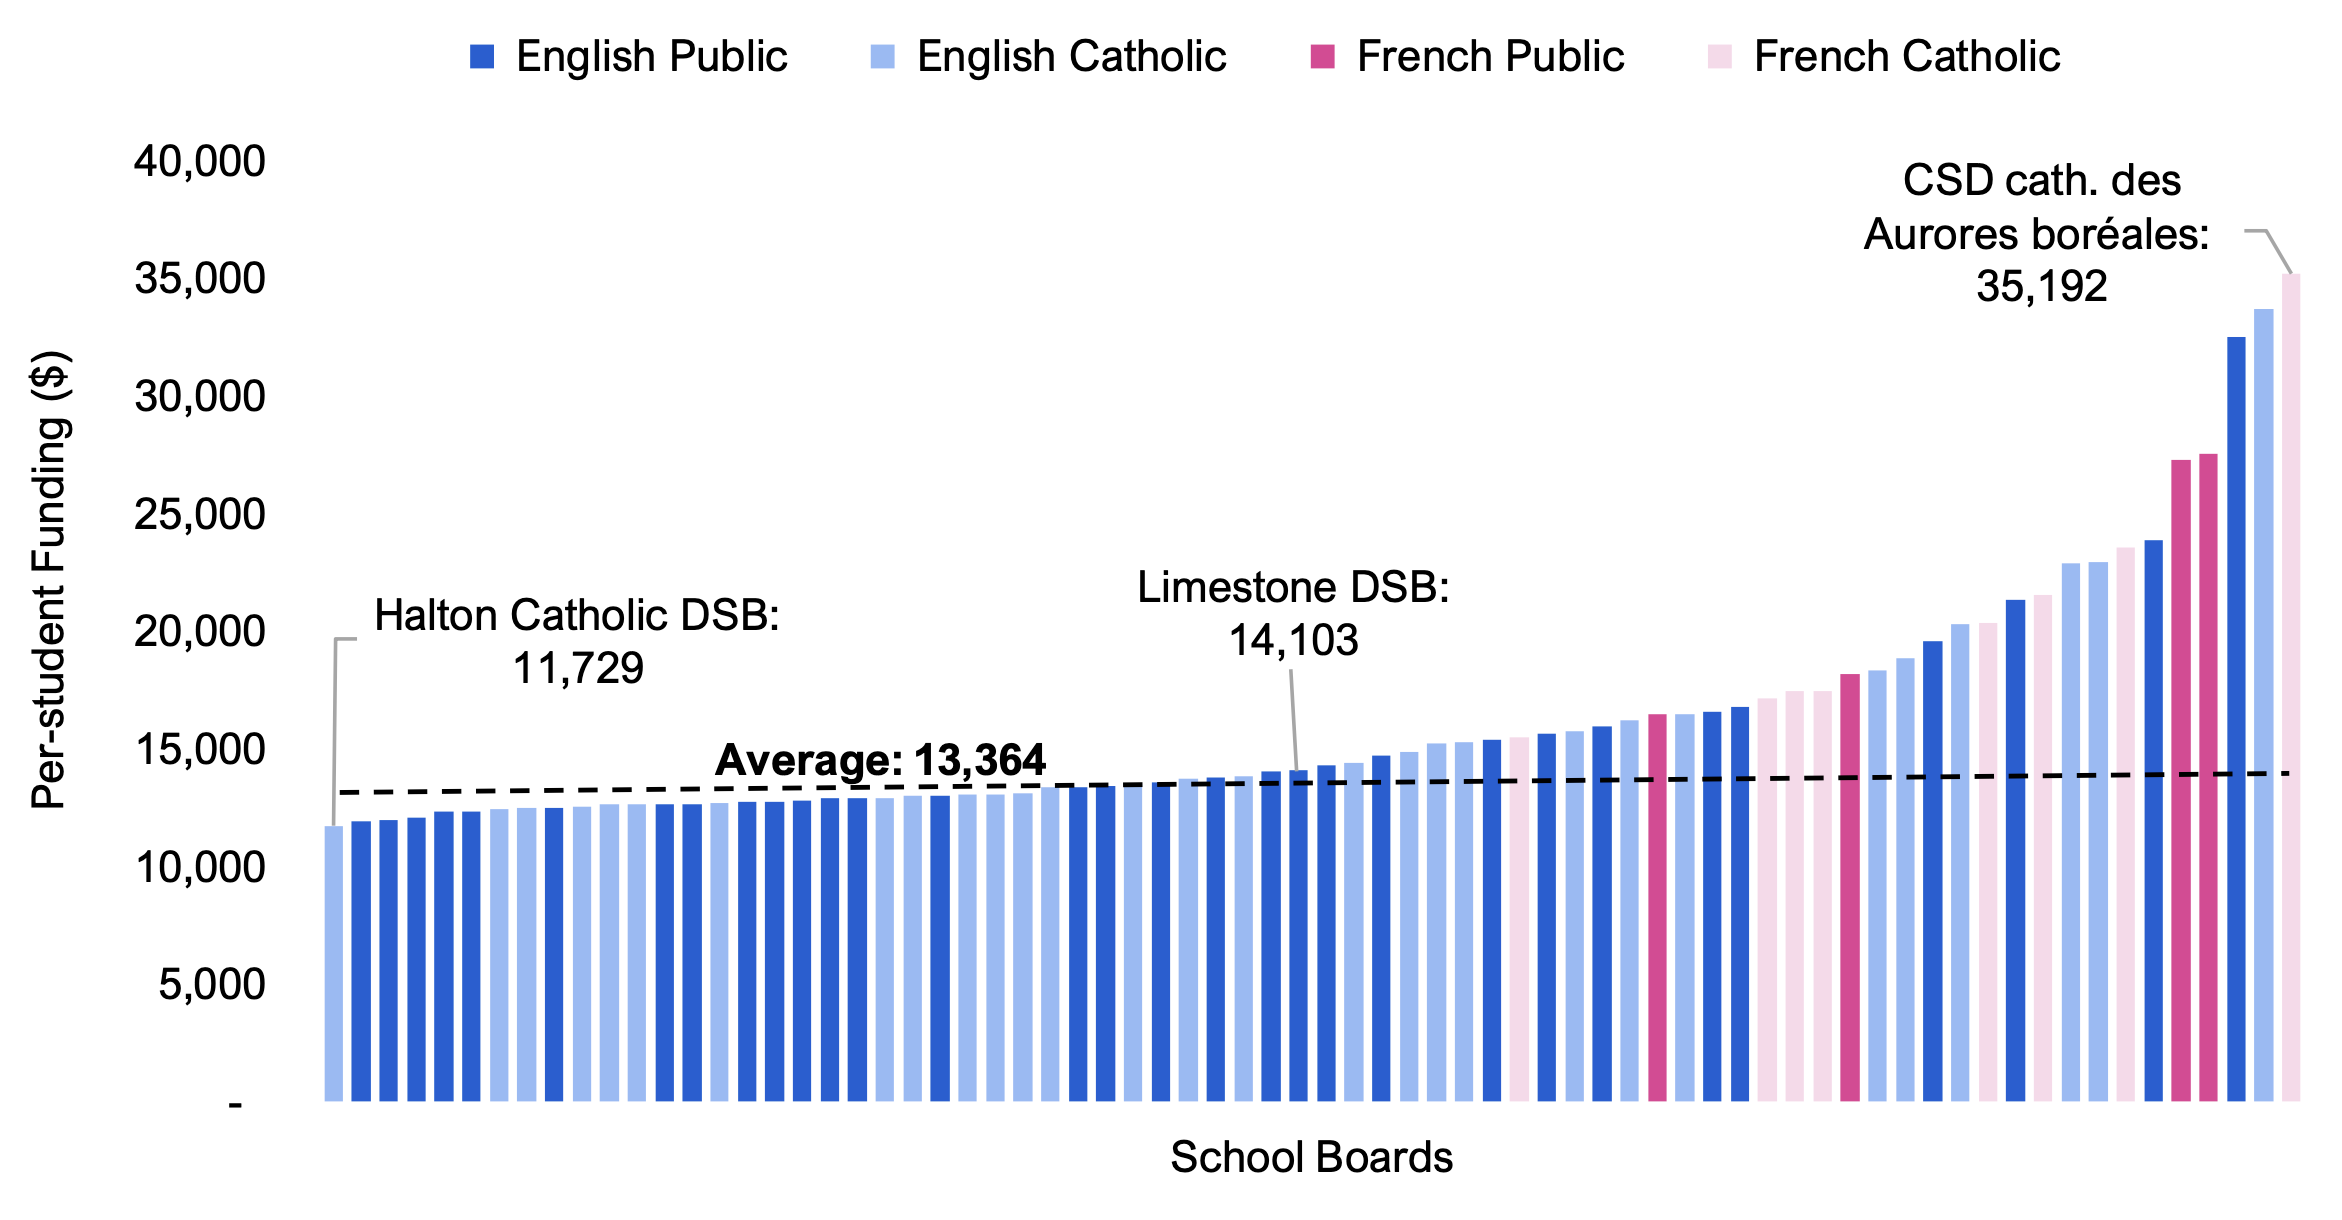 Figure 4.1 shows per-student funding by school board, broken down by system. On average, the French Public and French Catholic school boards received higher per-student funding than English Public and English Catholic school boards.